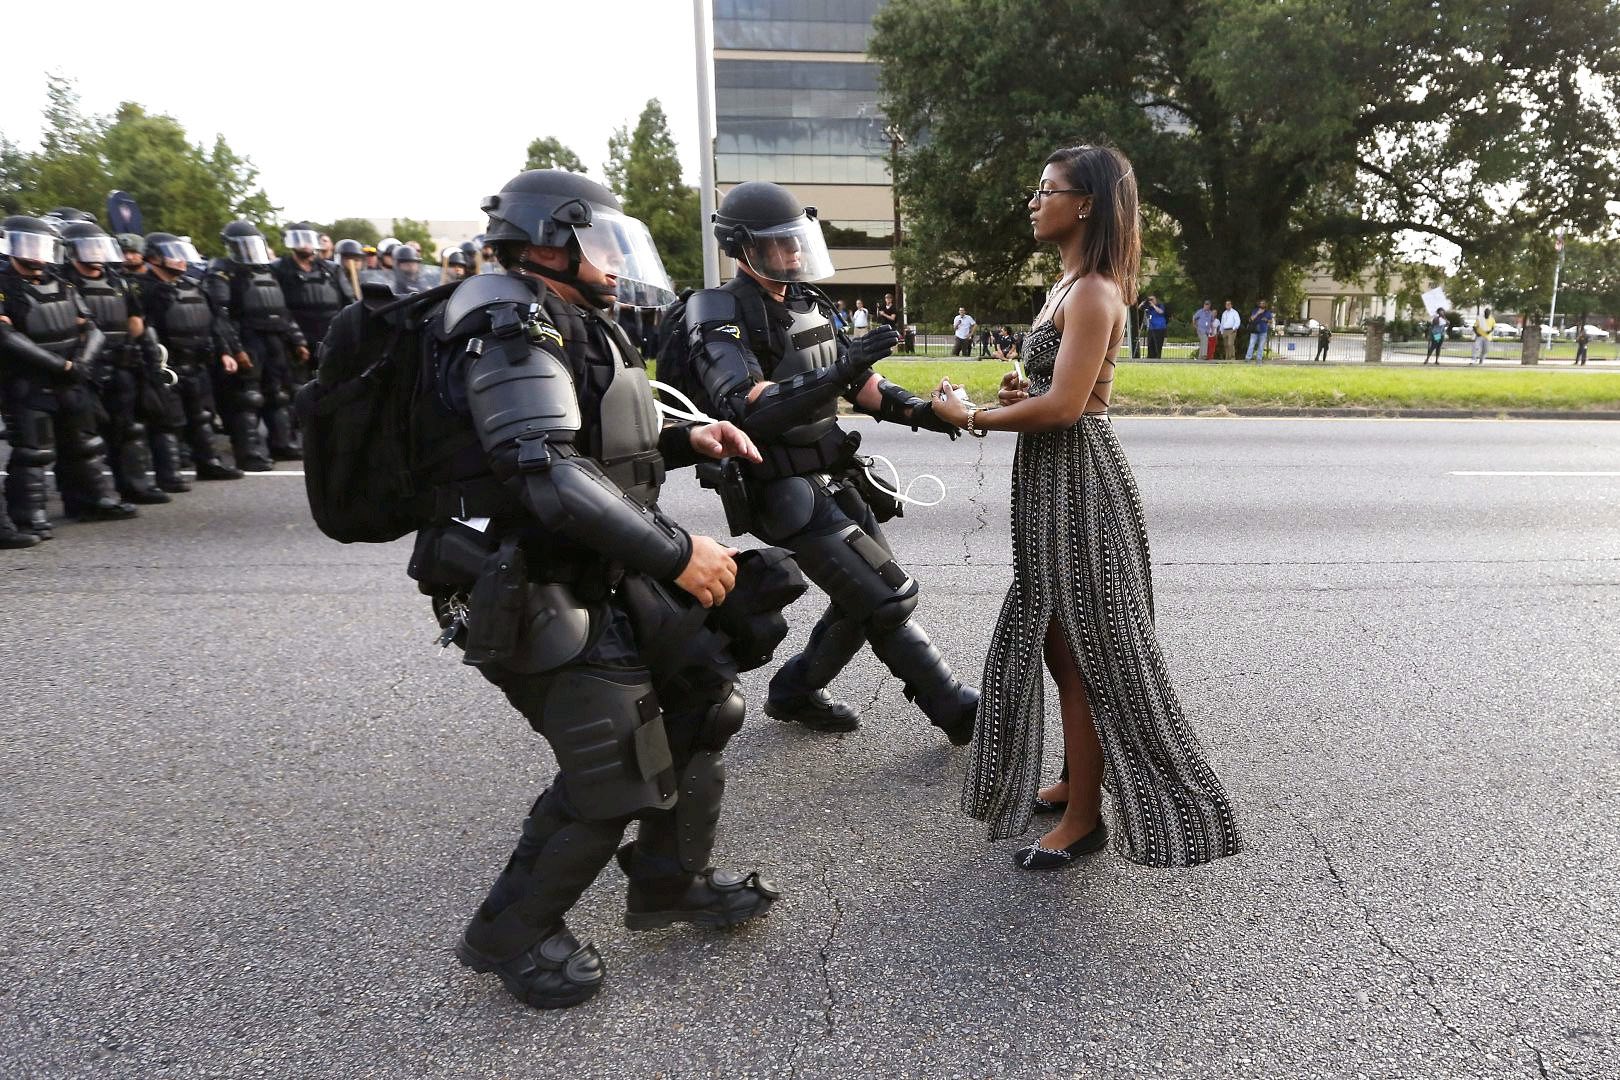 Leshia Evans and riot police during a protest against police brutality at the Baton Rouge police department in Louisiana. PHOTO: AFP